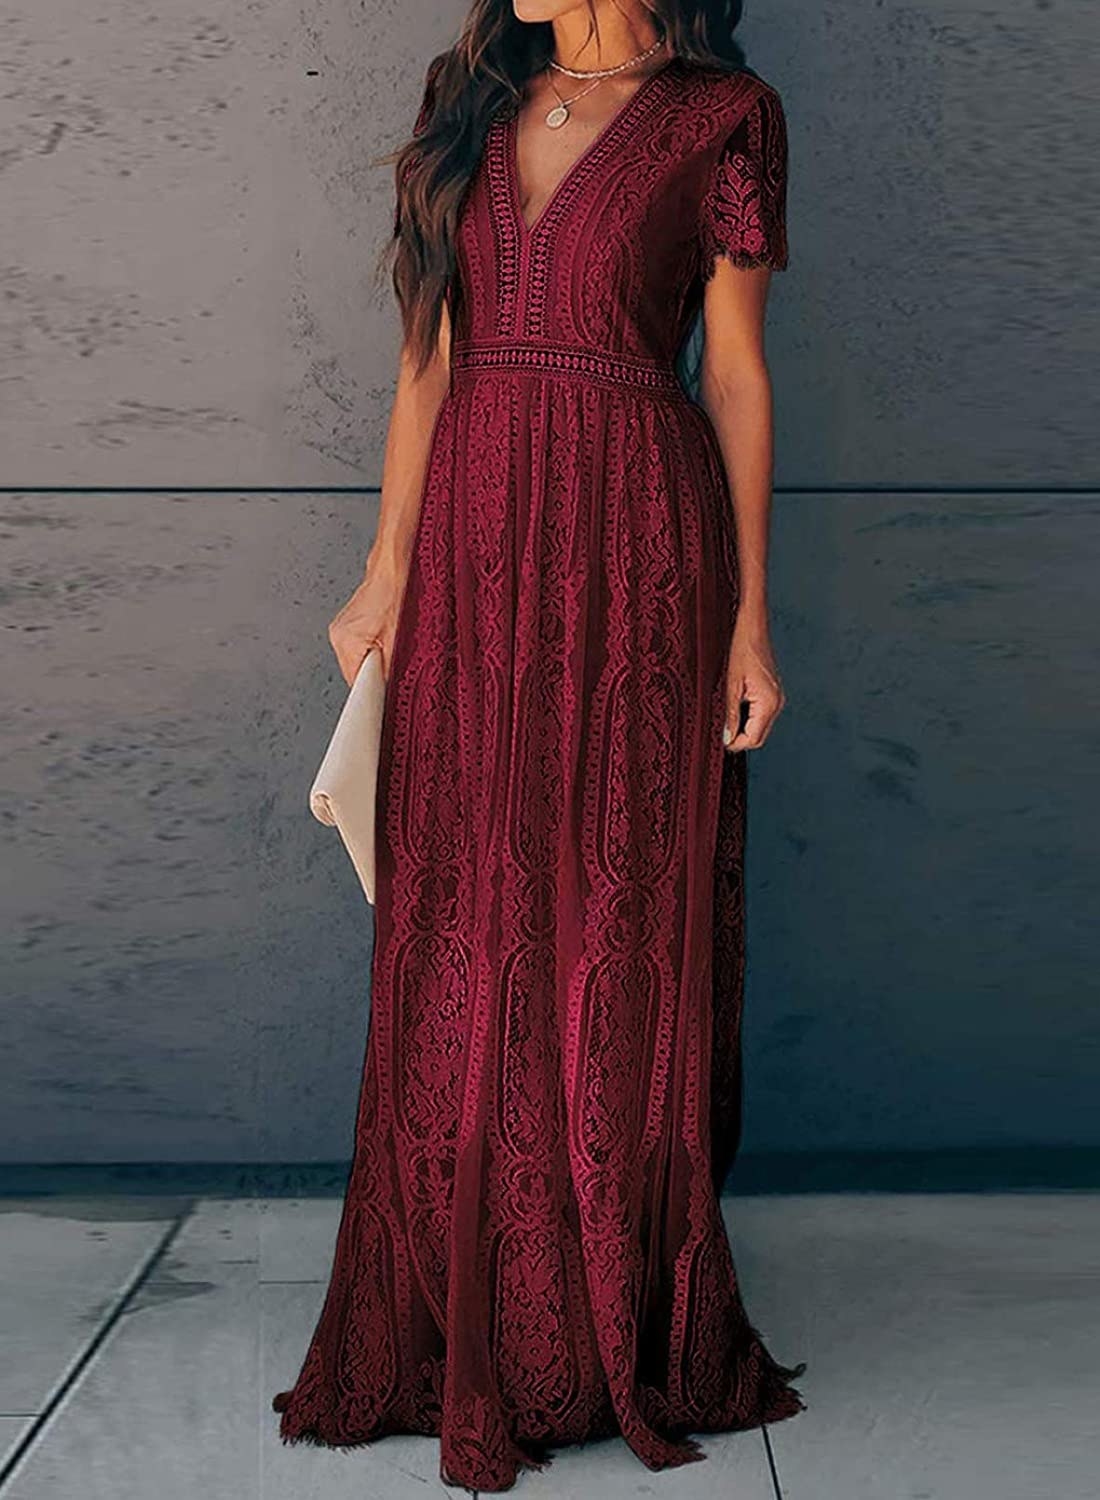 model wearing the burgundy dress with lace-like detailing